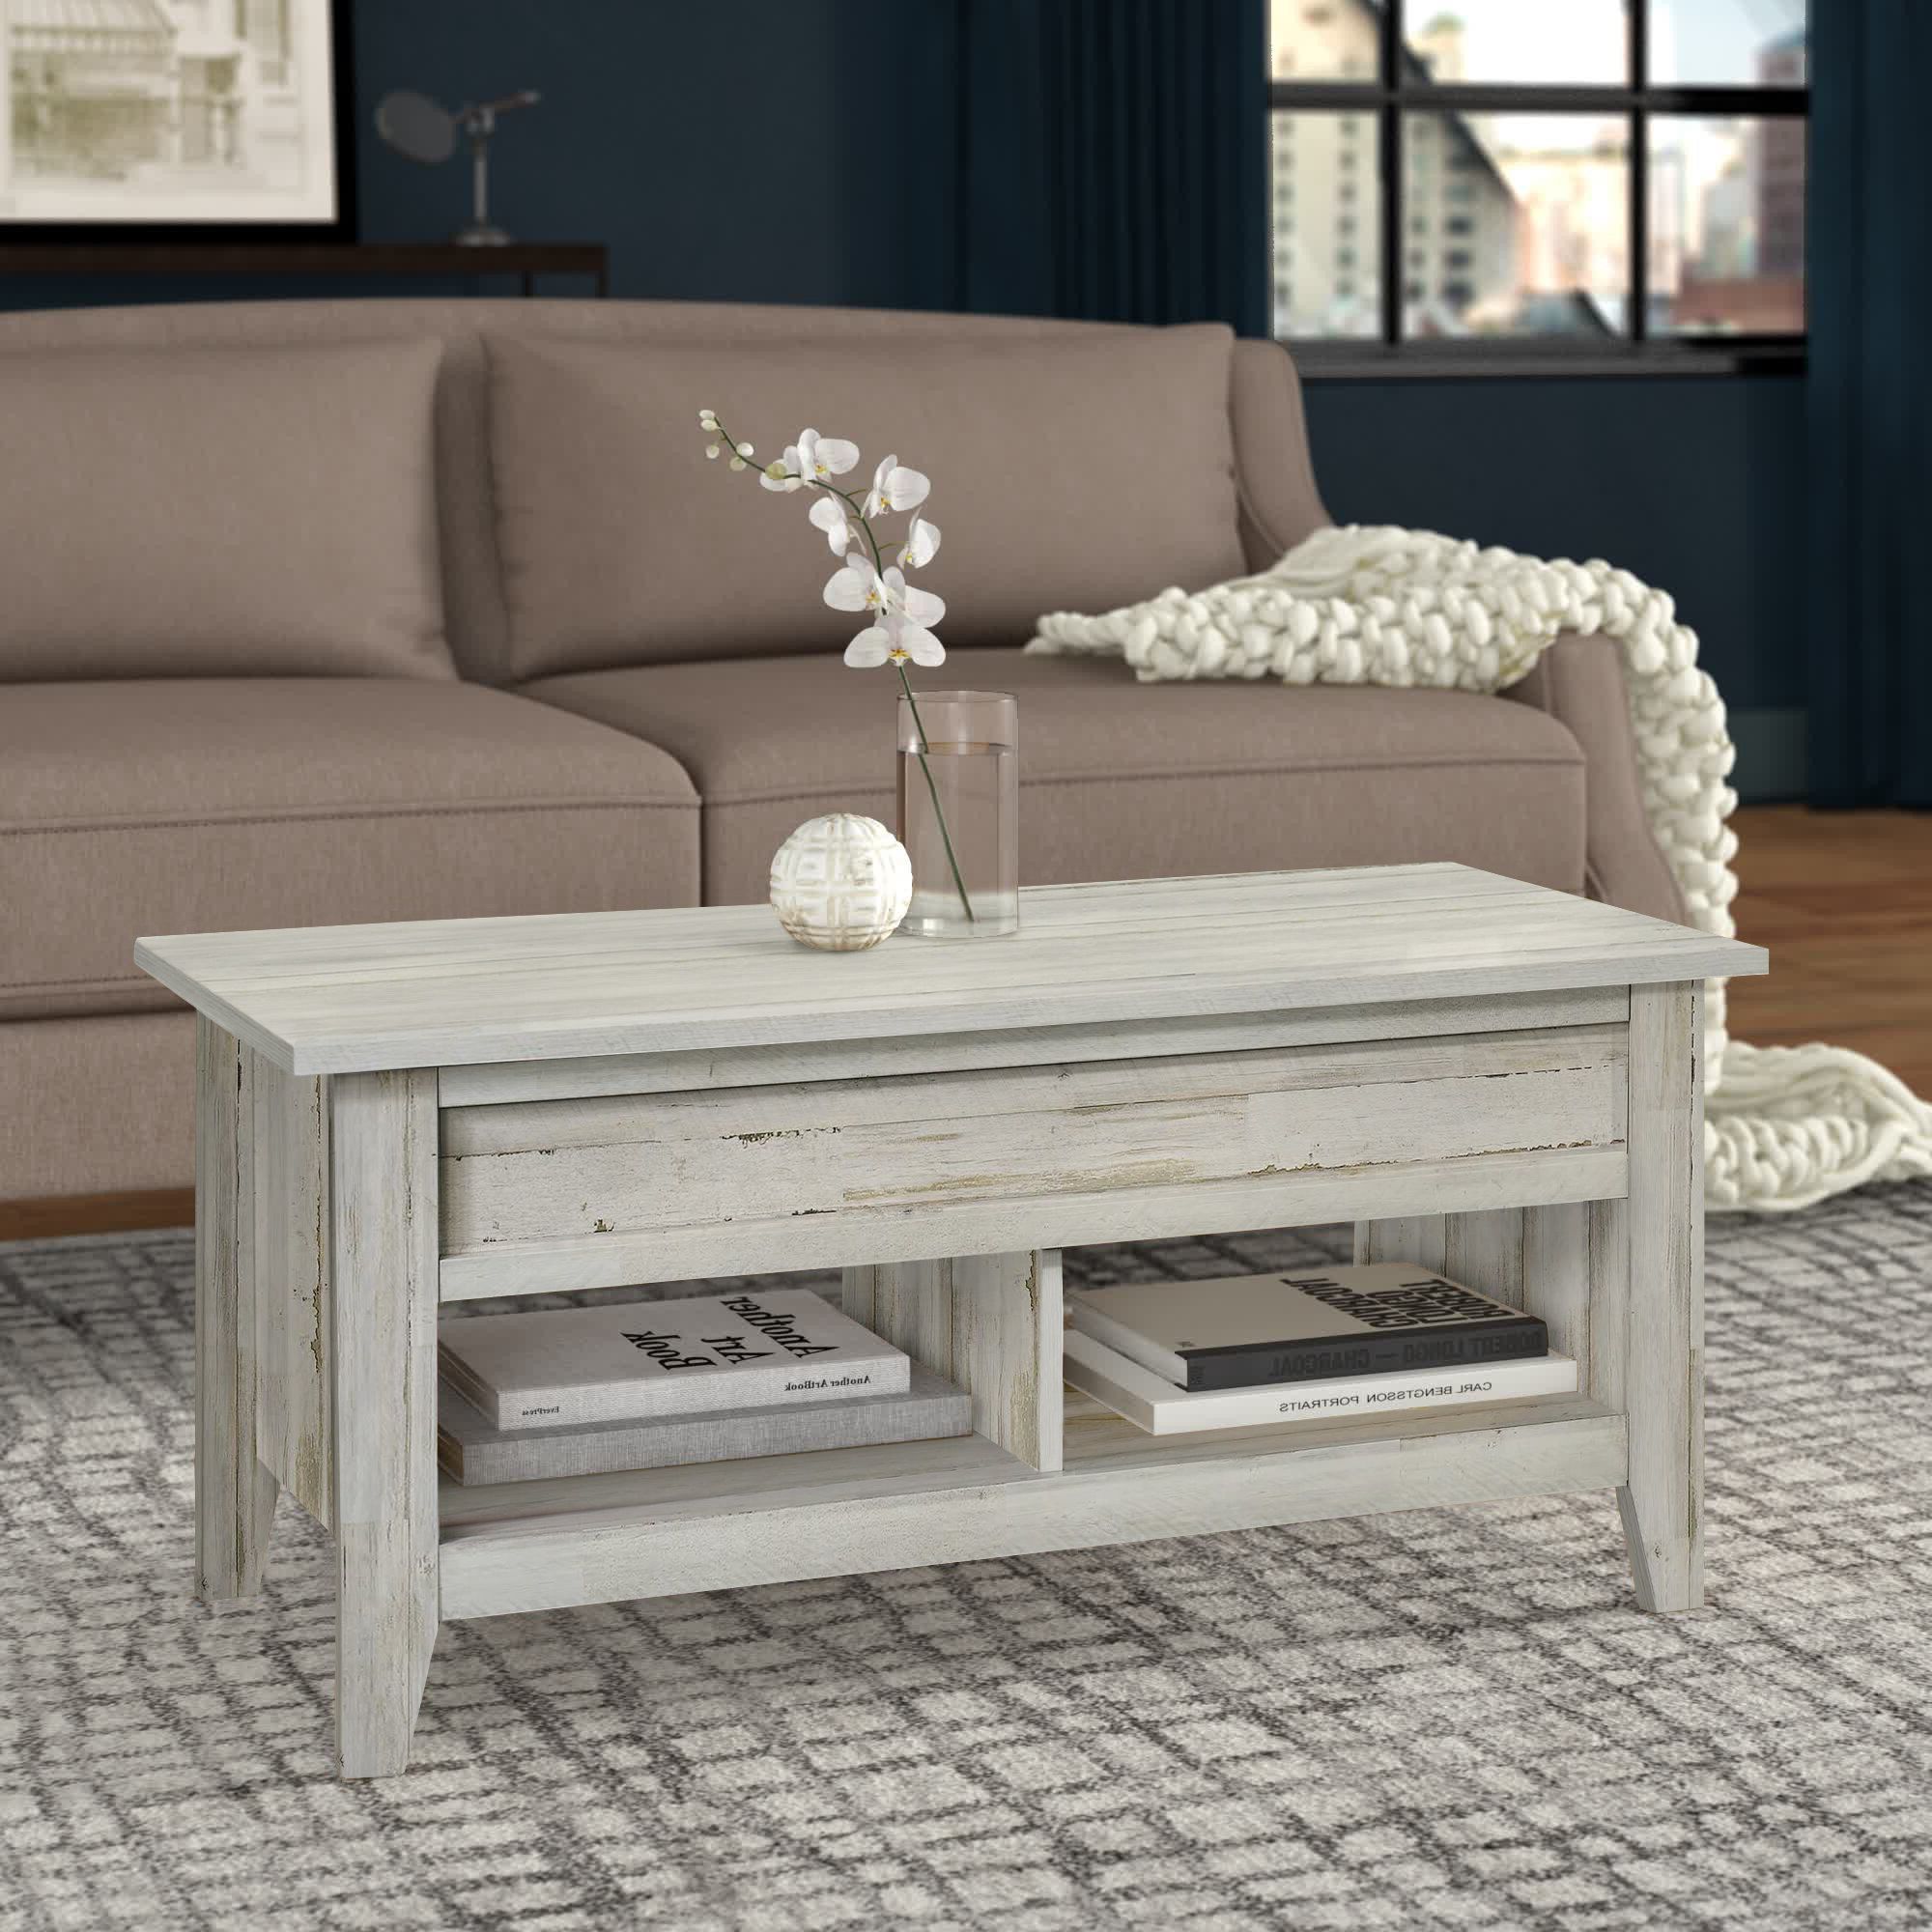 Wayfair Intended For Well Known Lift Top Storage Coffee Tables (View 7 of 20)